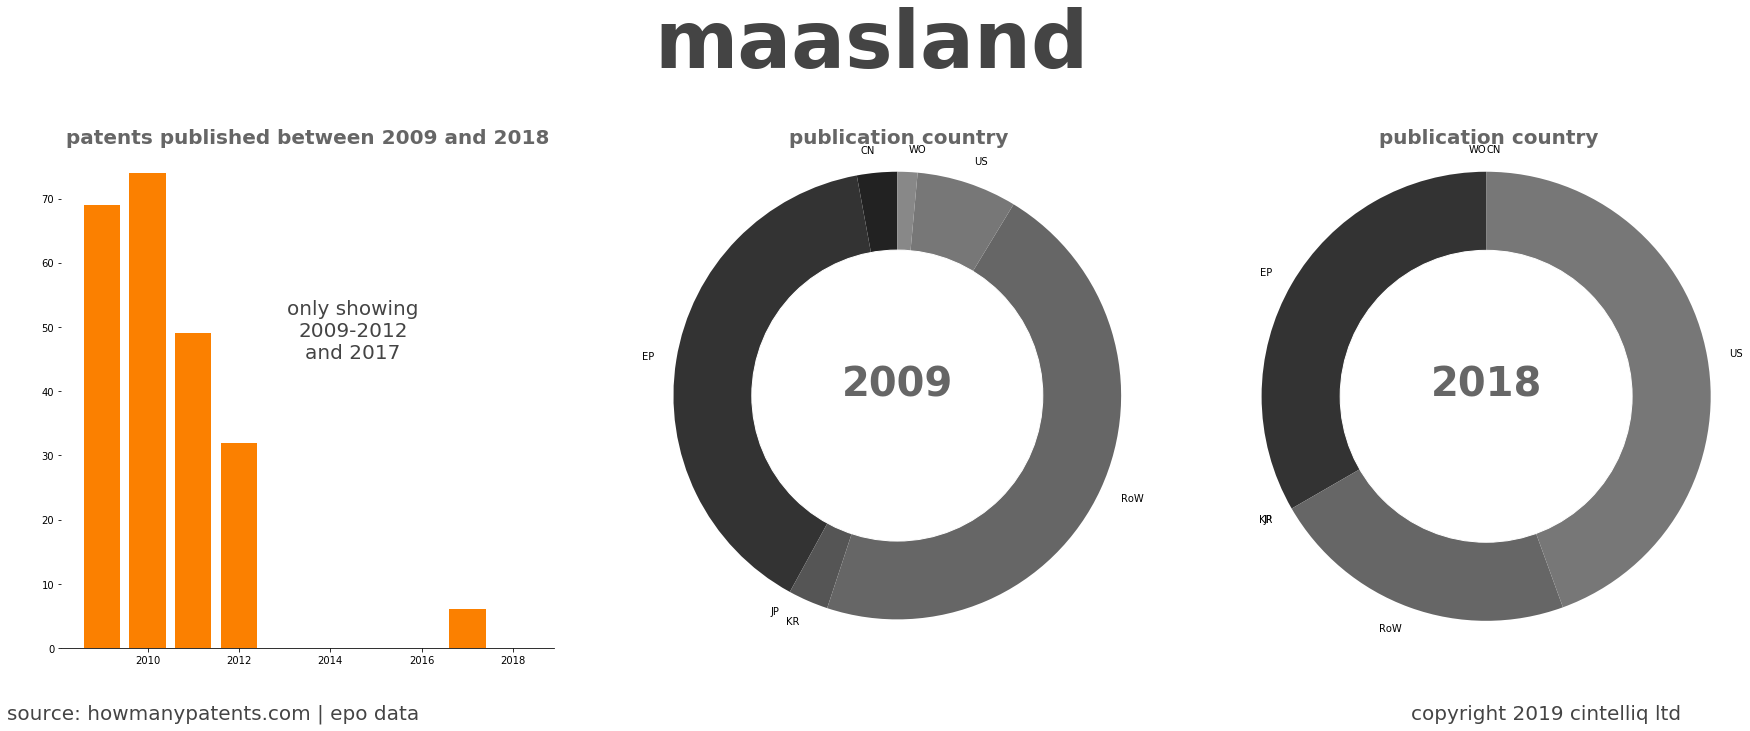 summary of patents for Maasland